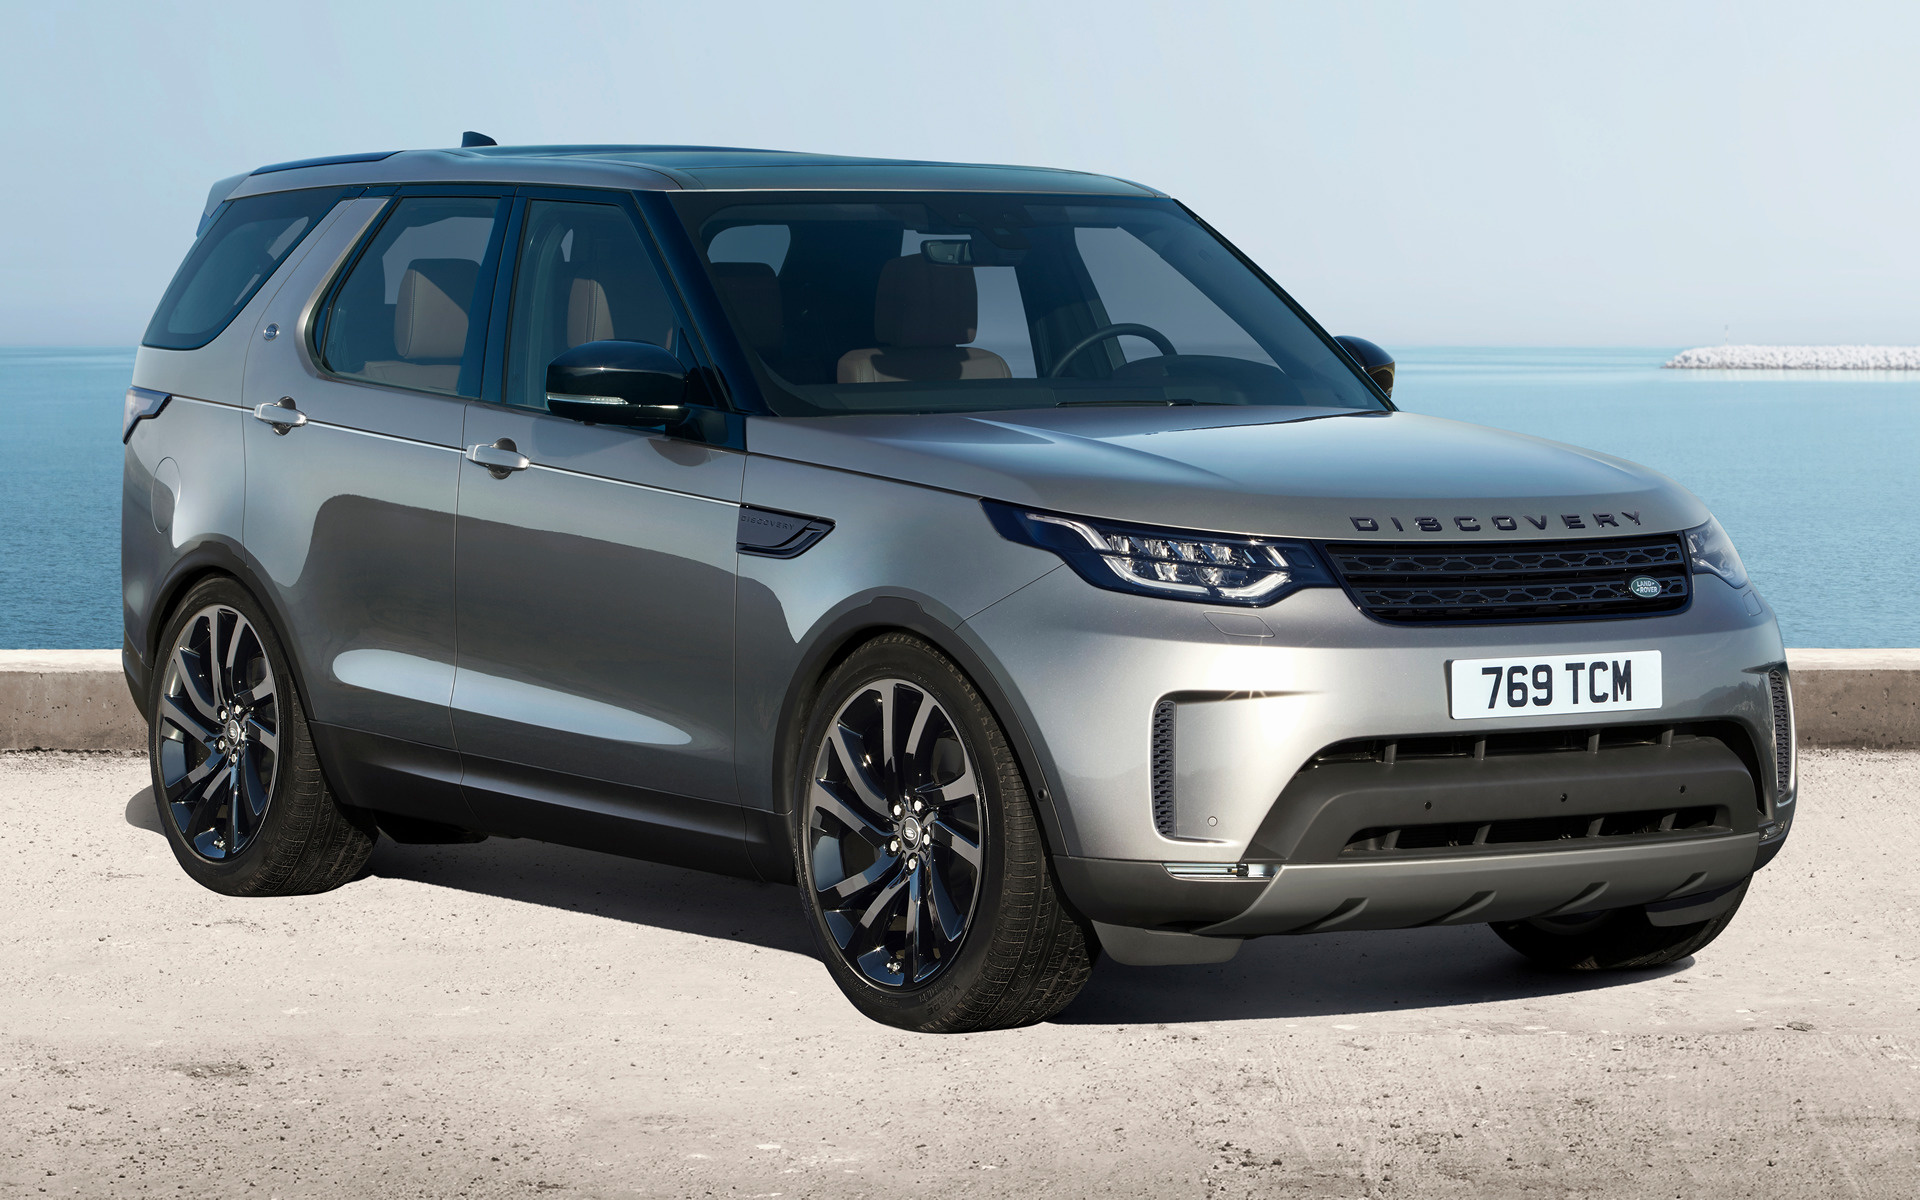 Only to discover. Ленд Ровер Дискавери 5. Range Rover Discovery 2017. Ленд Ровер Дискавери 2018. Land Rover Discovery 2022.